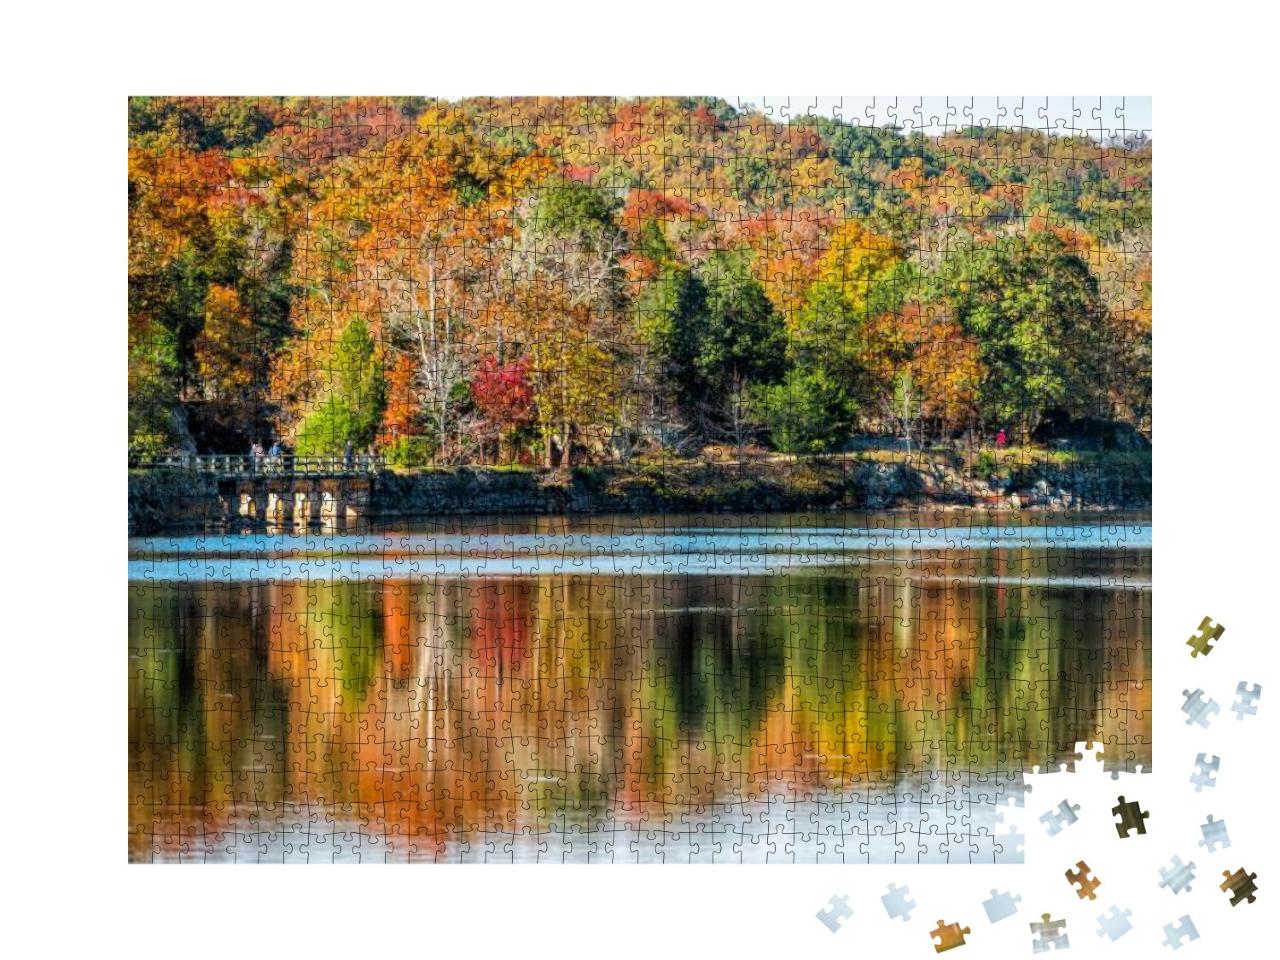 Great Falls Trees Reflection During Autumn in Maryland Co... Jigsaw Puzzle with 1000 pieces